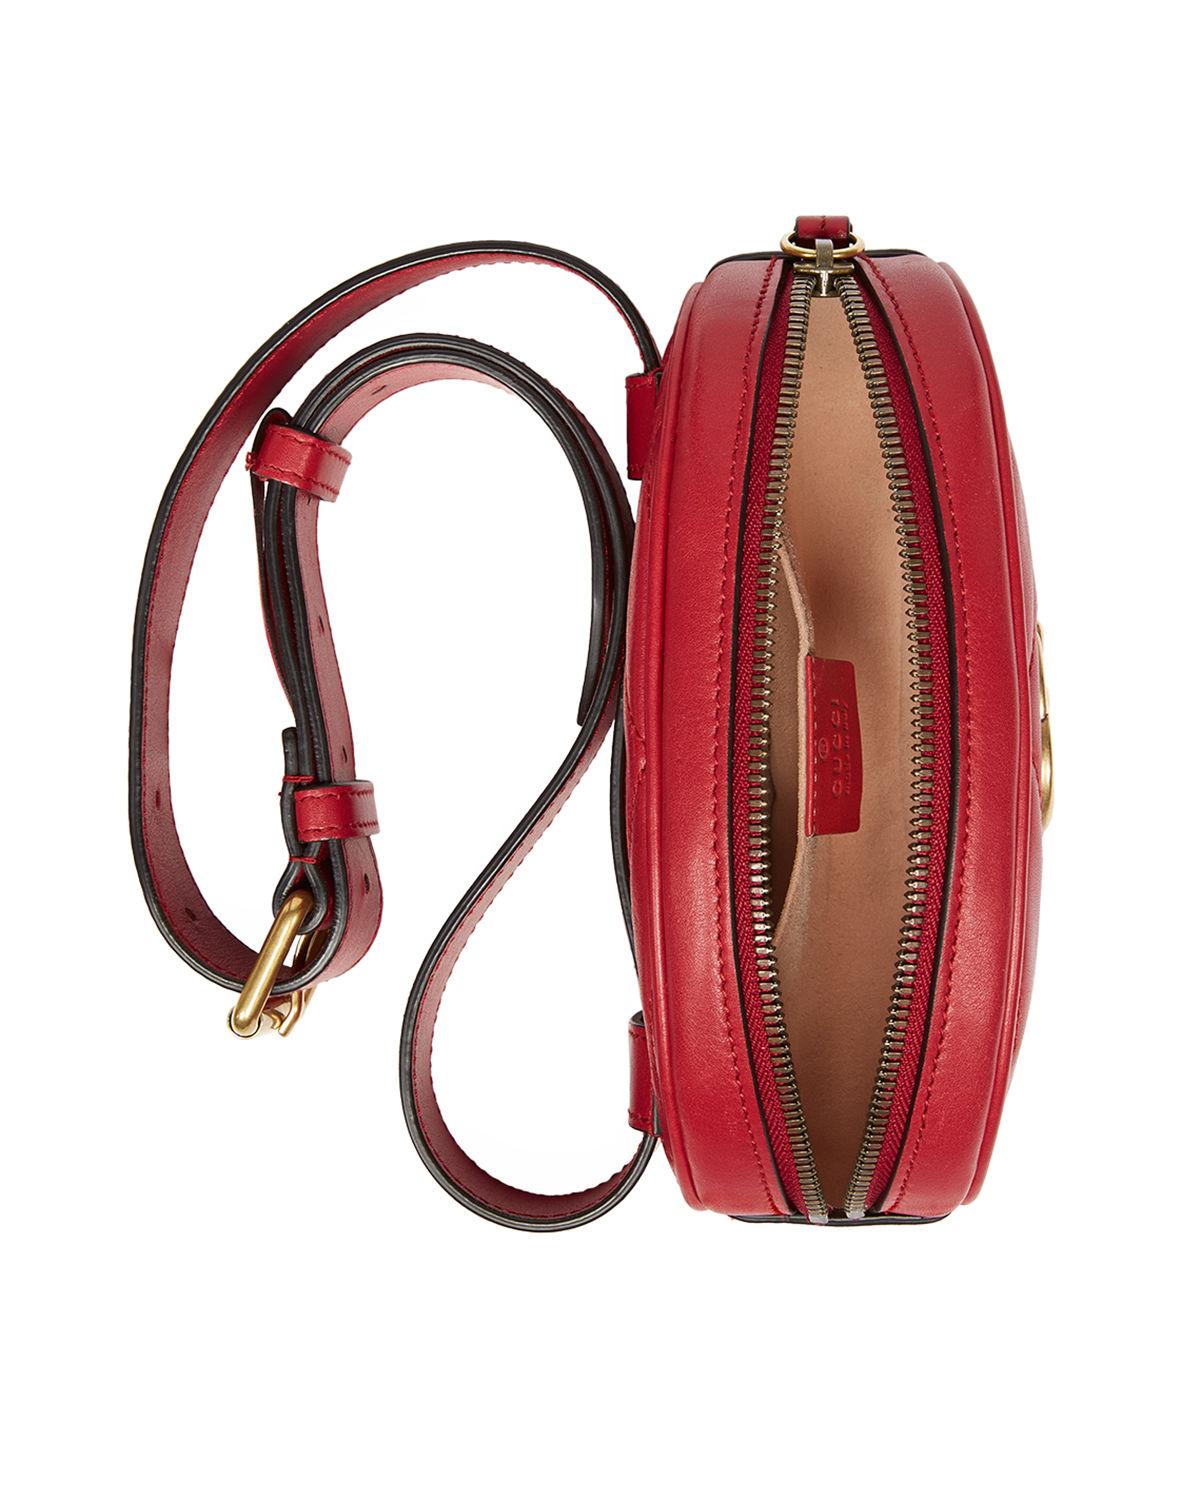 Lyst - Gucci Gg Marmont Small Quilted Leather Belt Bag in Red